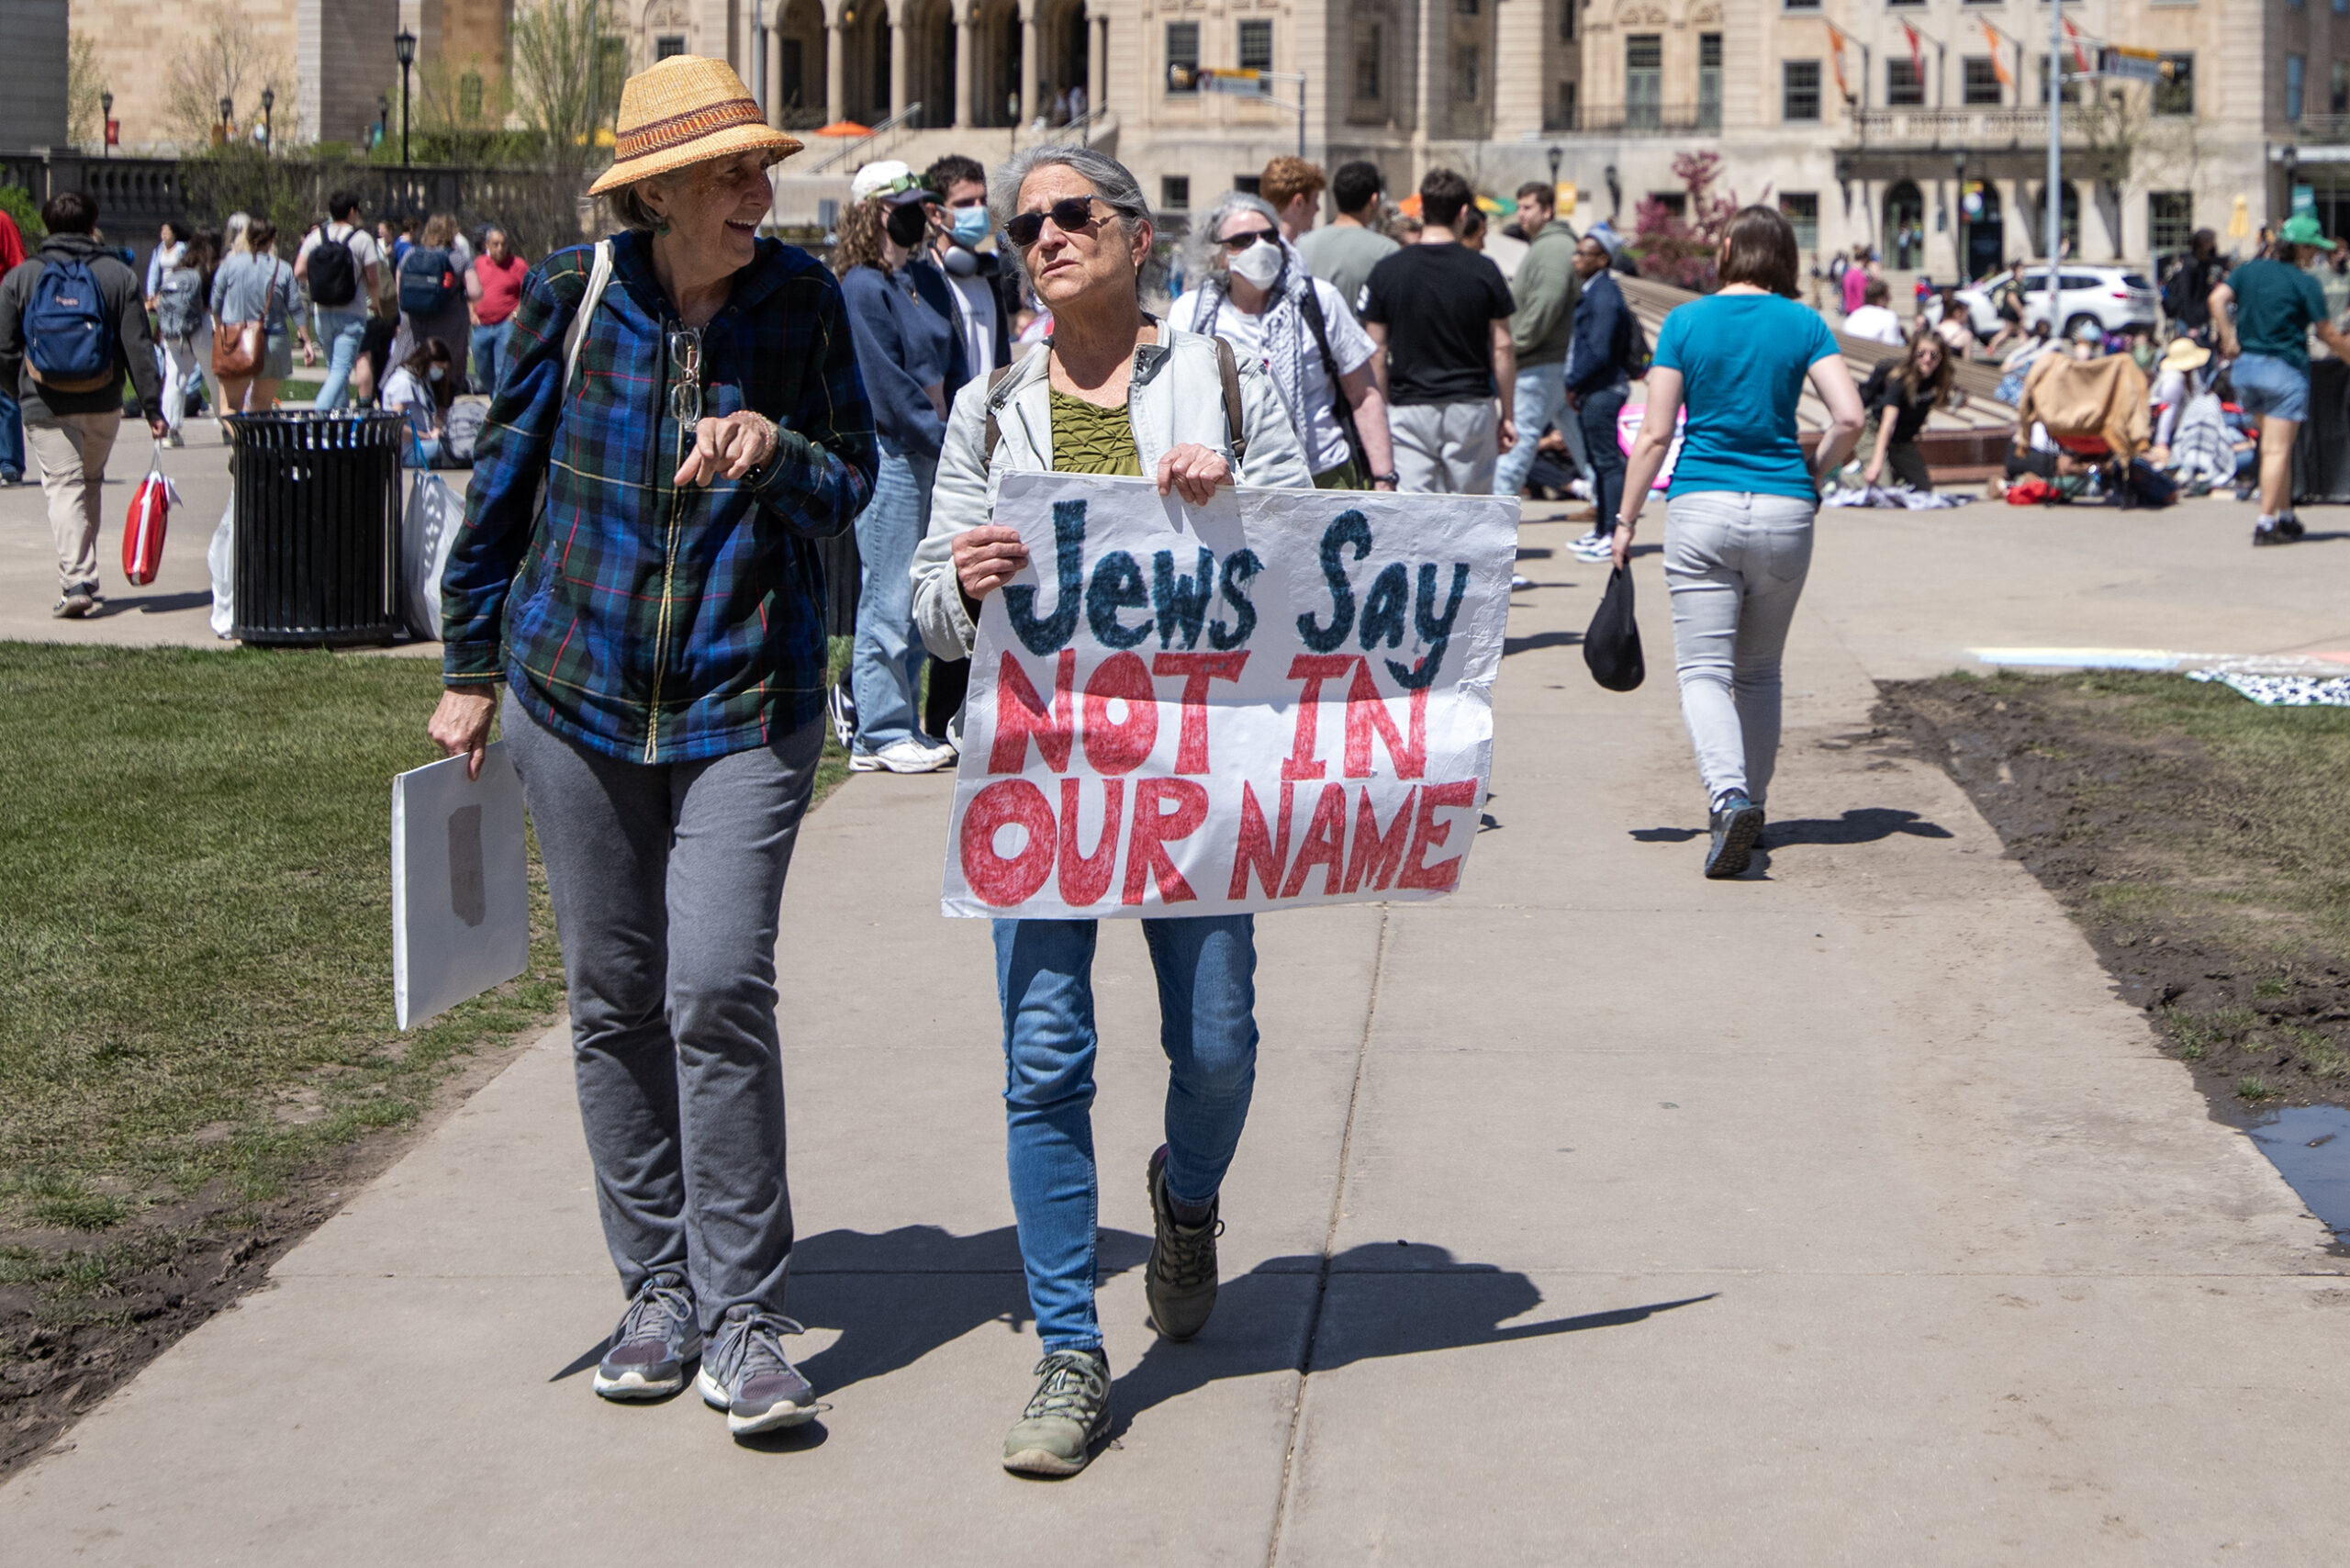 A woman walks with a sign that says "Jews Say Not In Our Name."